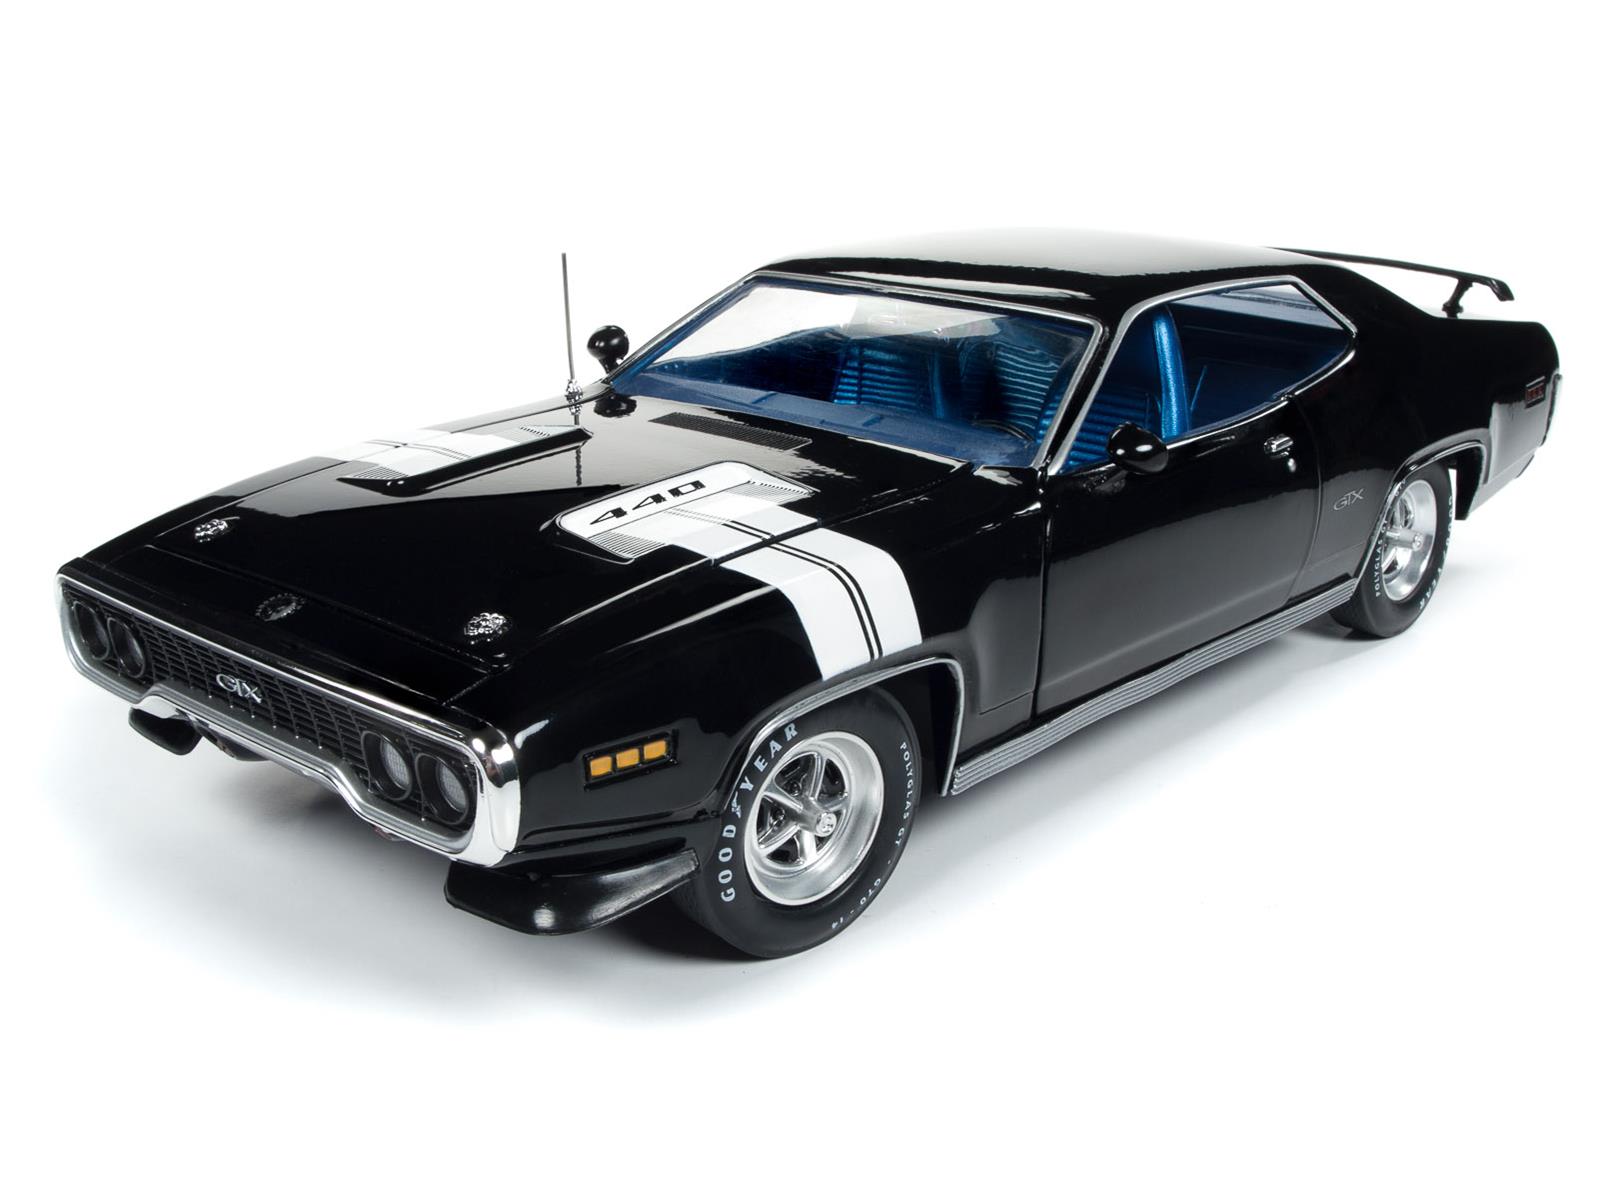 Summit Gifts AMM1133 1:18 Scale 1971 Plymouth GTX Hardtop Diecast Model |  Summit Racing